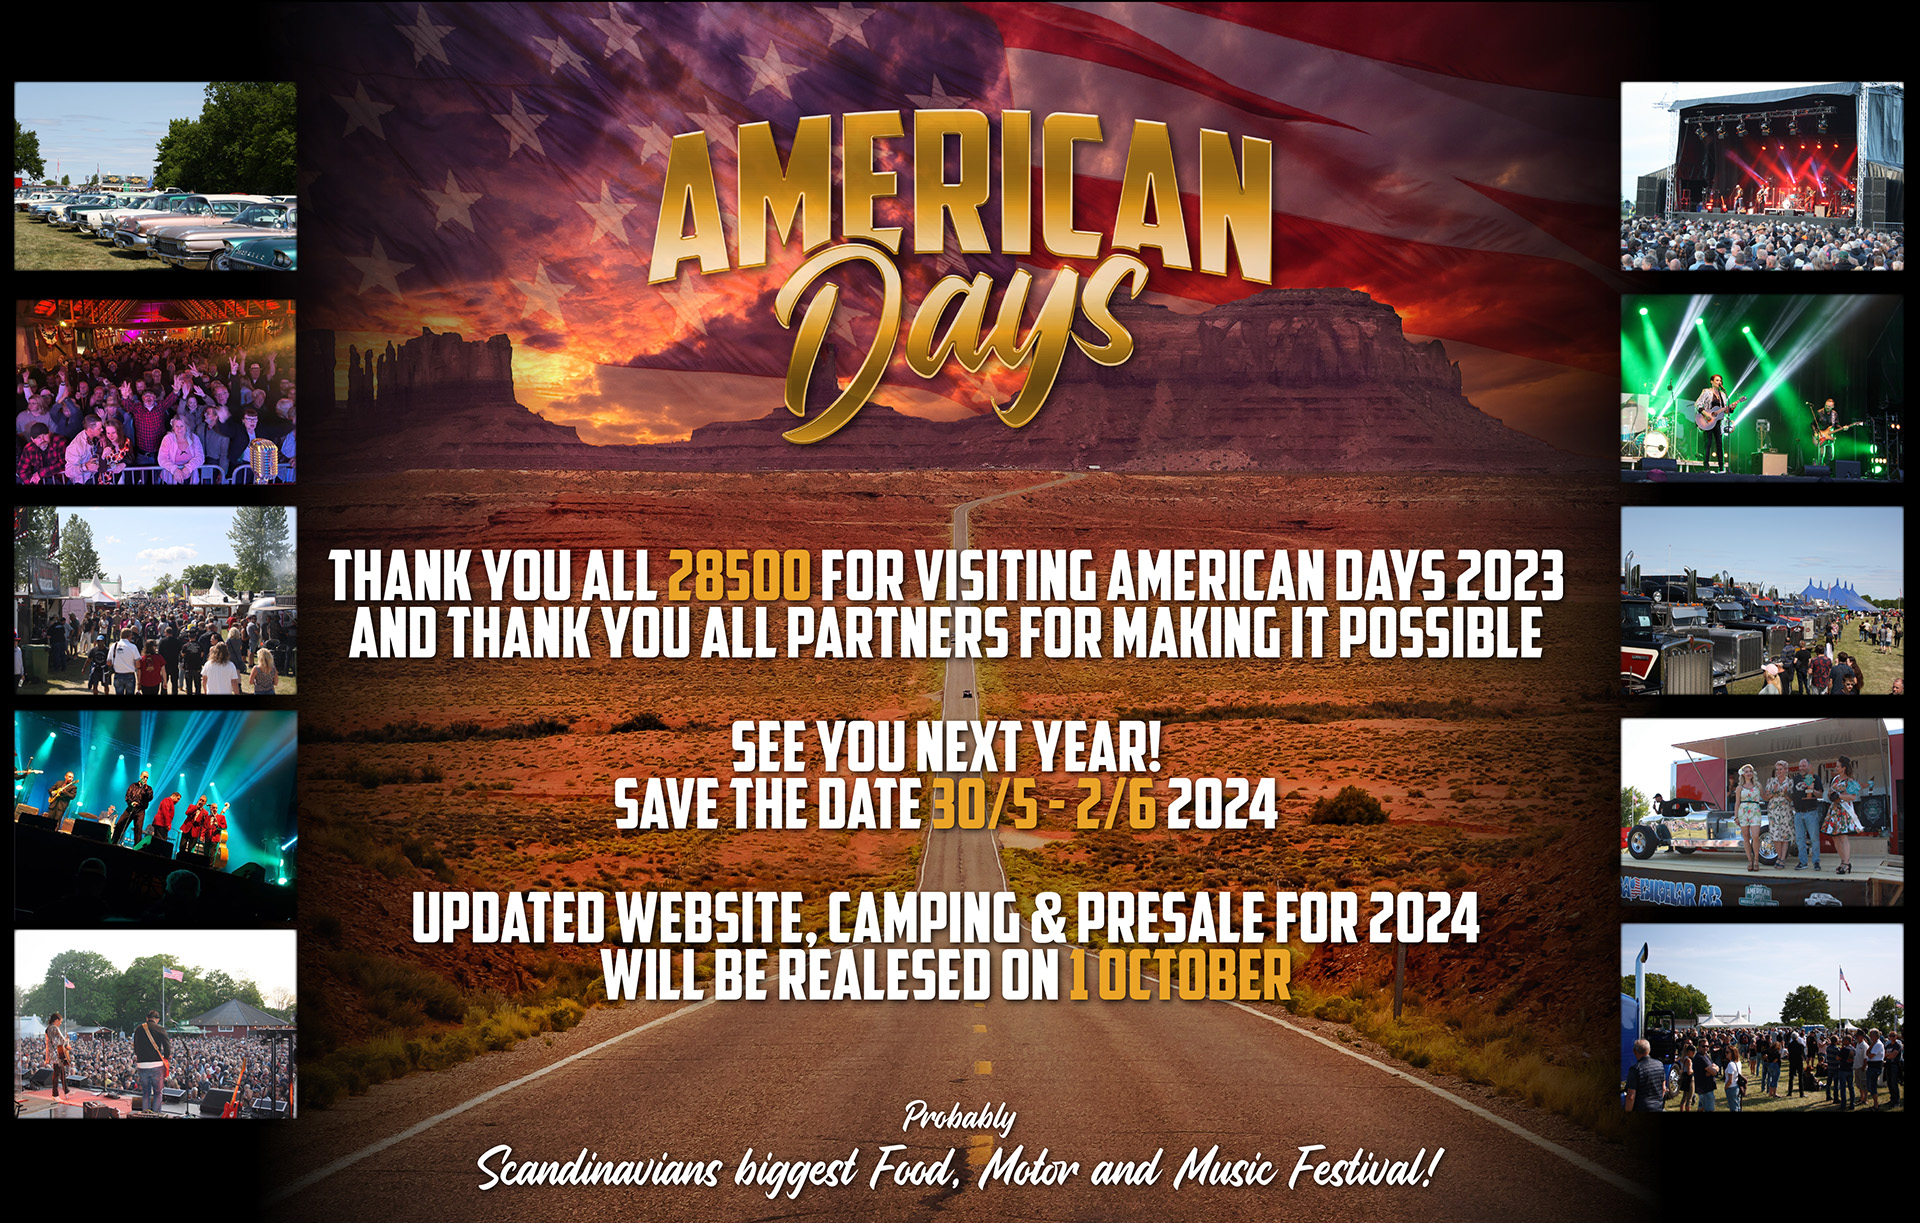 Welcome Banner American Days 2024 - From 30/5 TO 2/6 2024